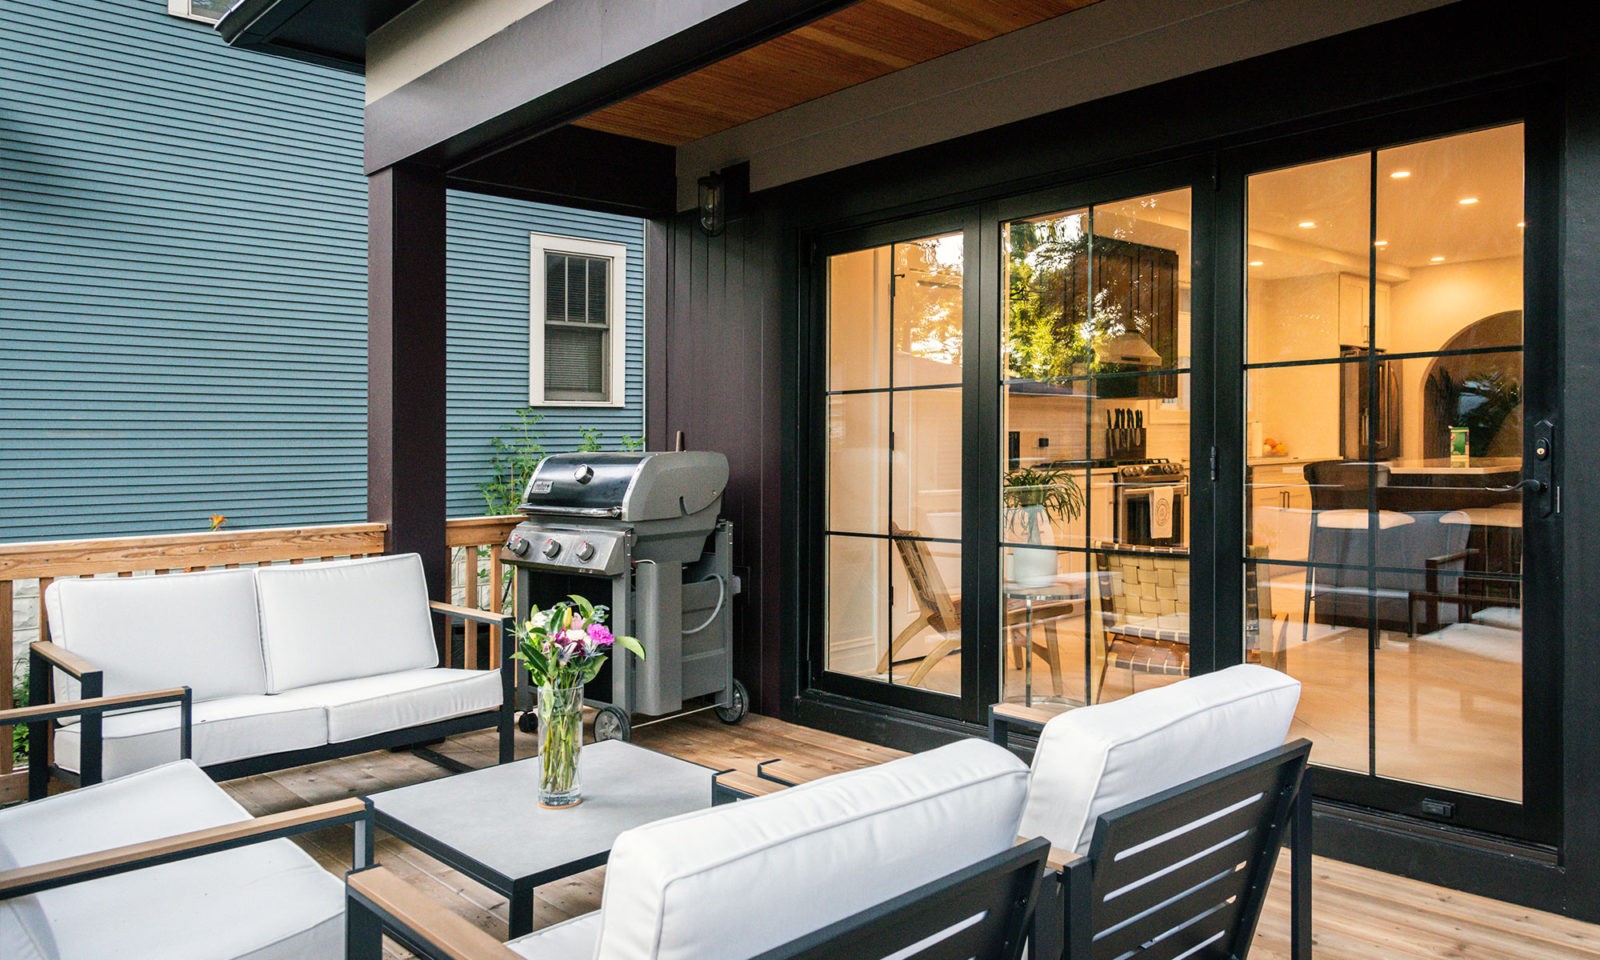 Newly renovated patio area with outdoor furniture, gas grill, and glass doors